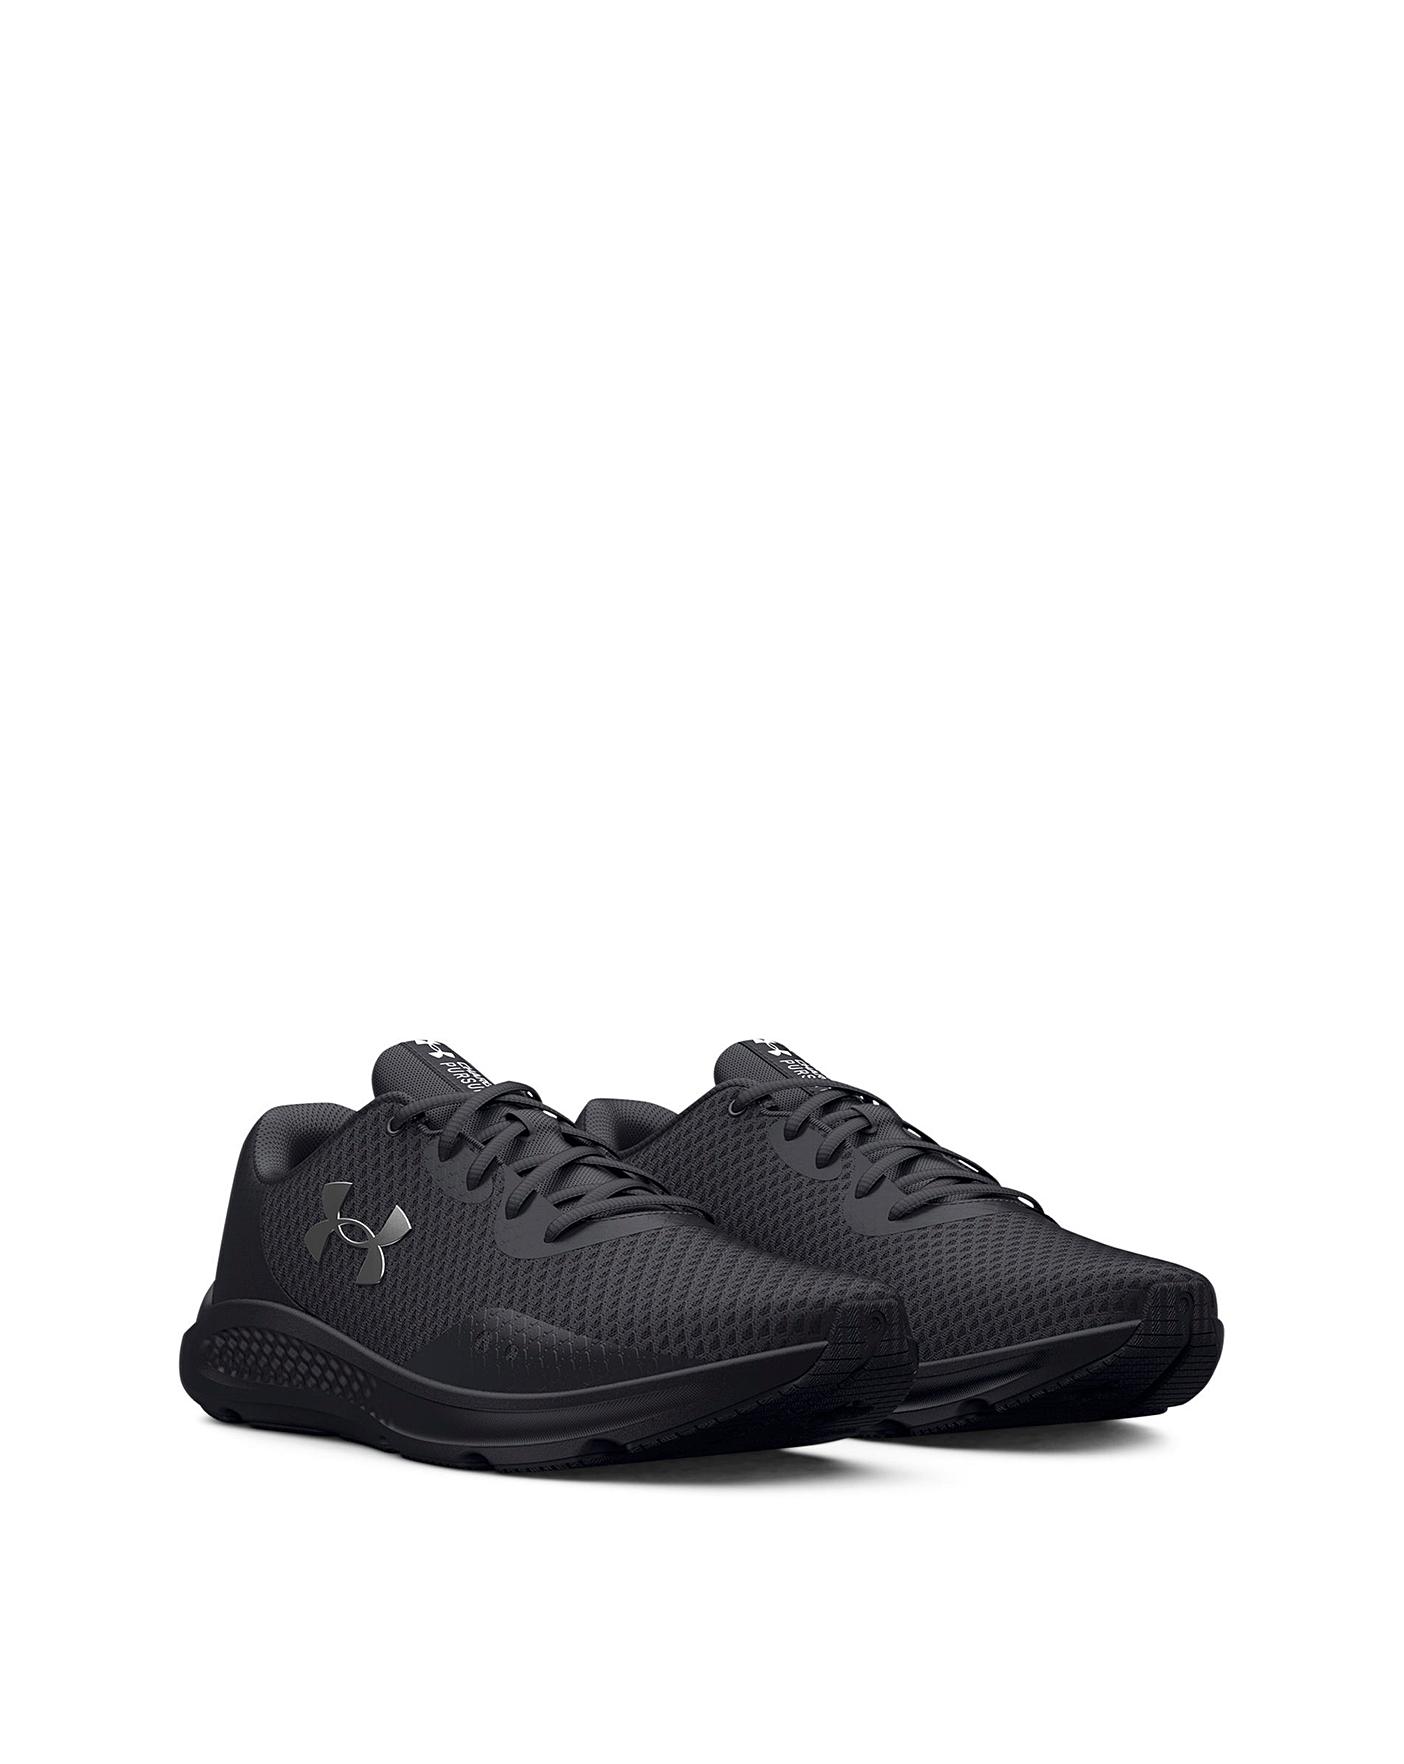 Under Armour Mens Charged Pursuit 3 Extra Wide Running Shoes